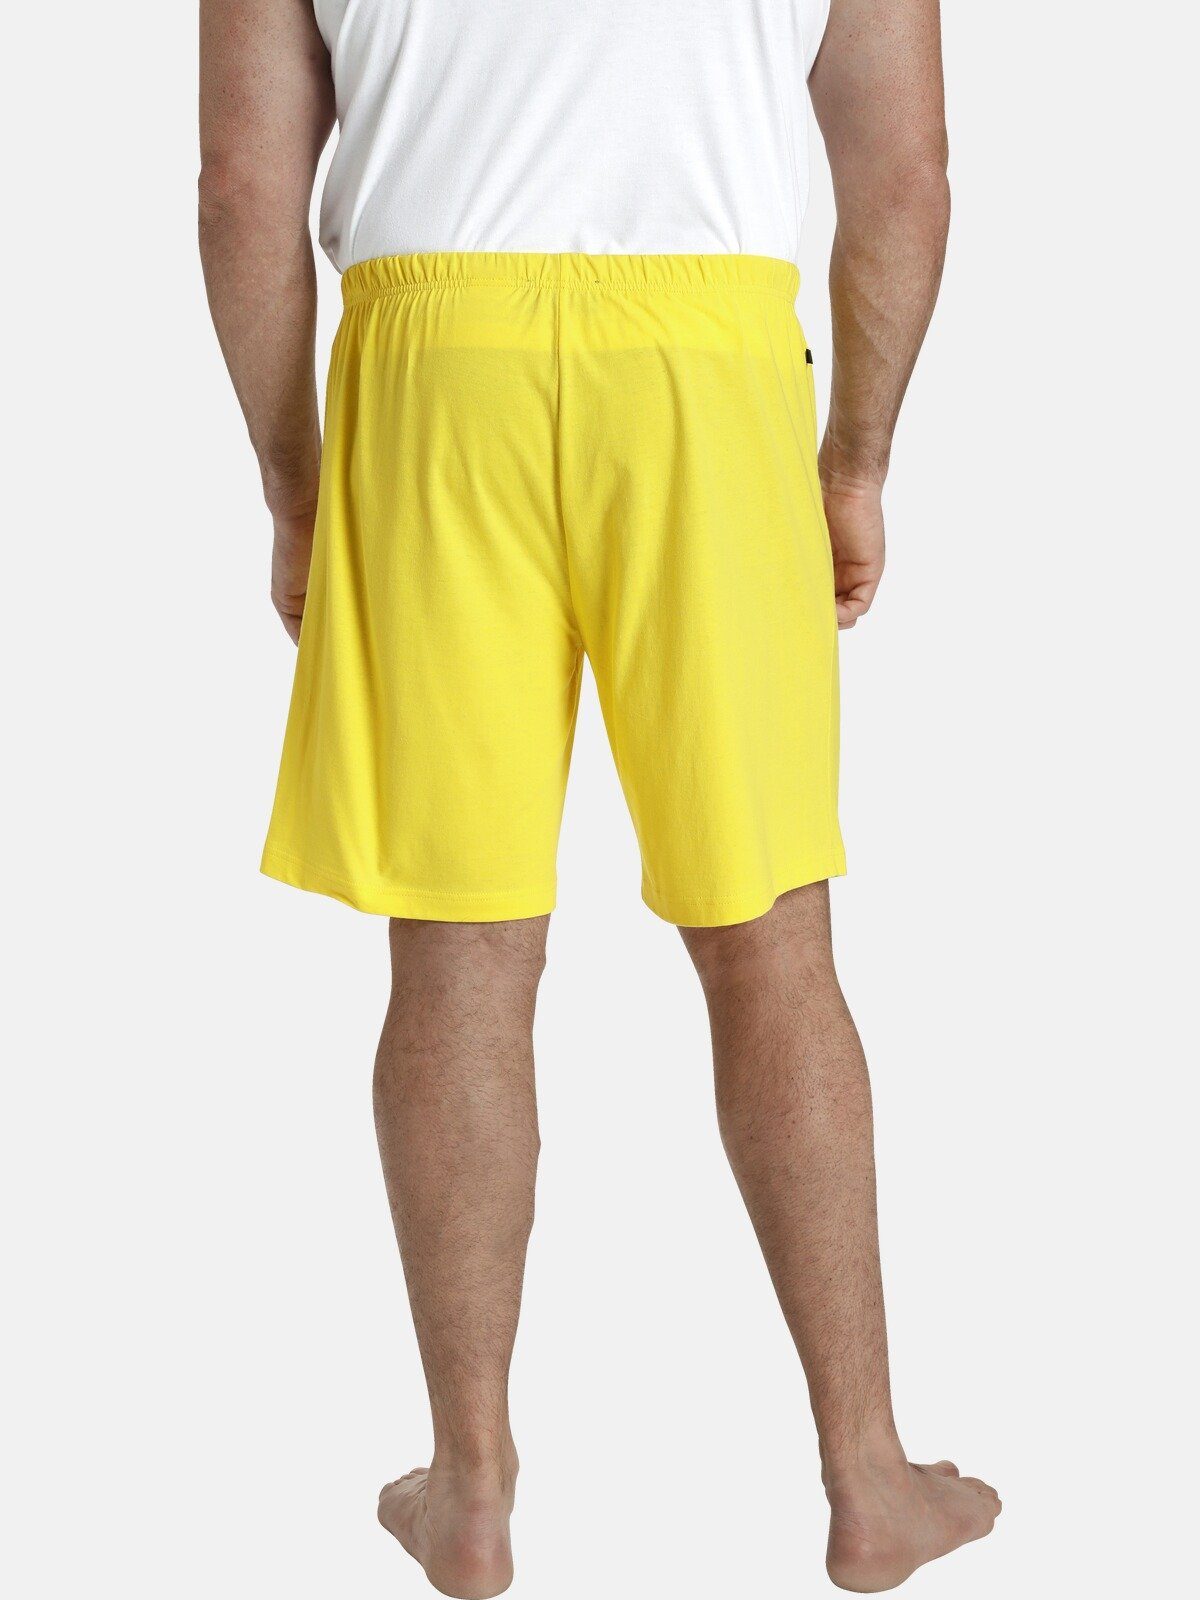 bequeme Colby Schlafhose Charles gelb MYCROFT Relaxshorts LORD leichte